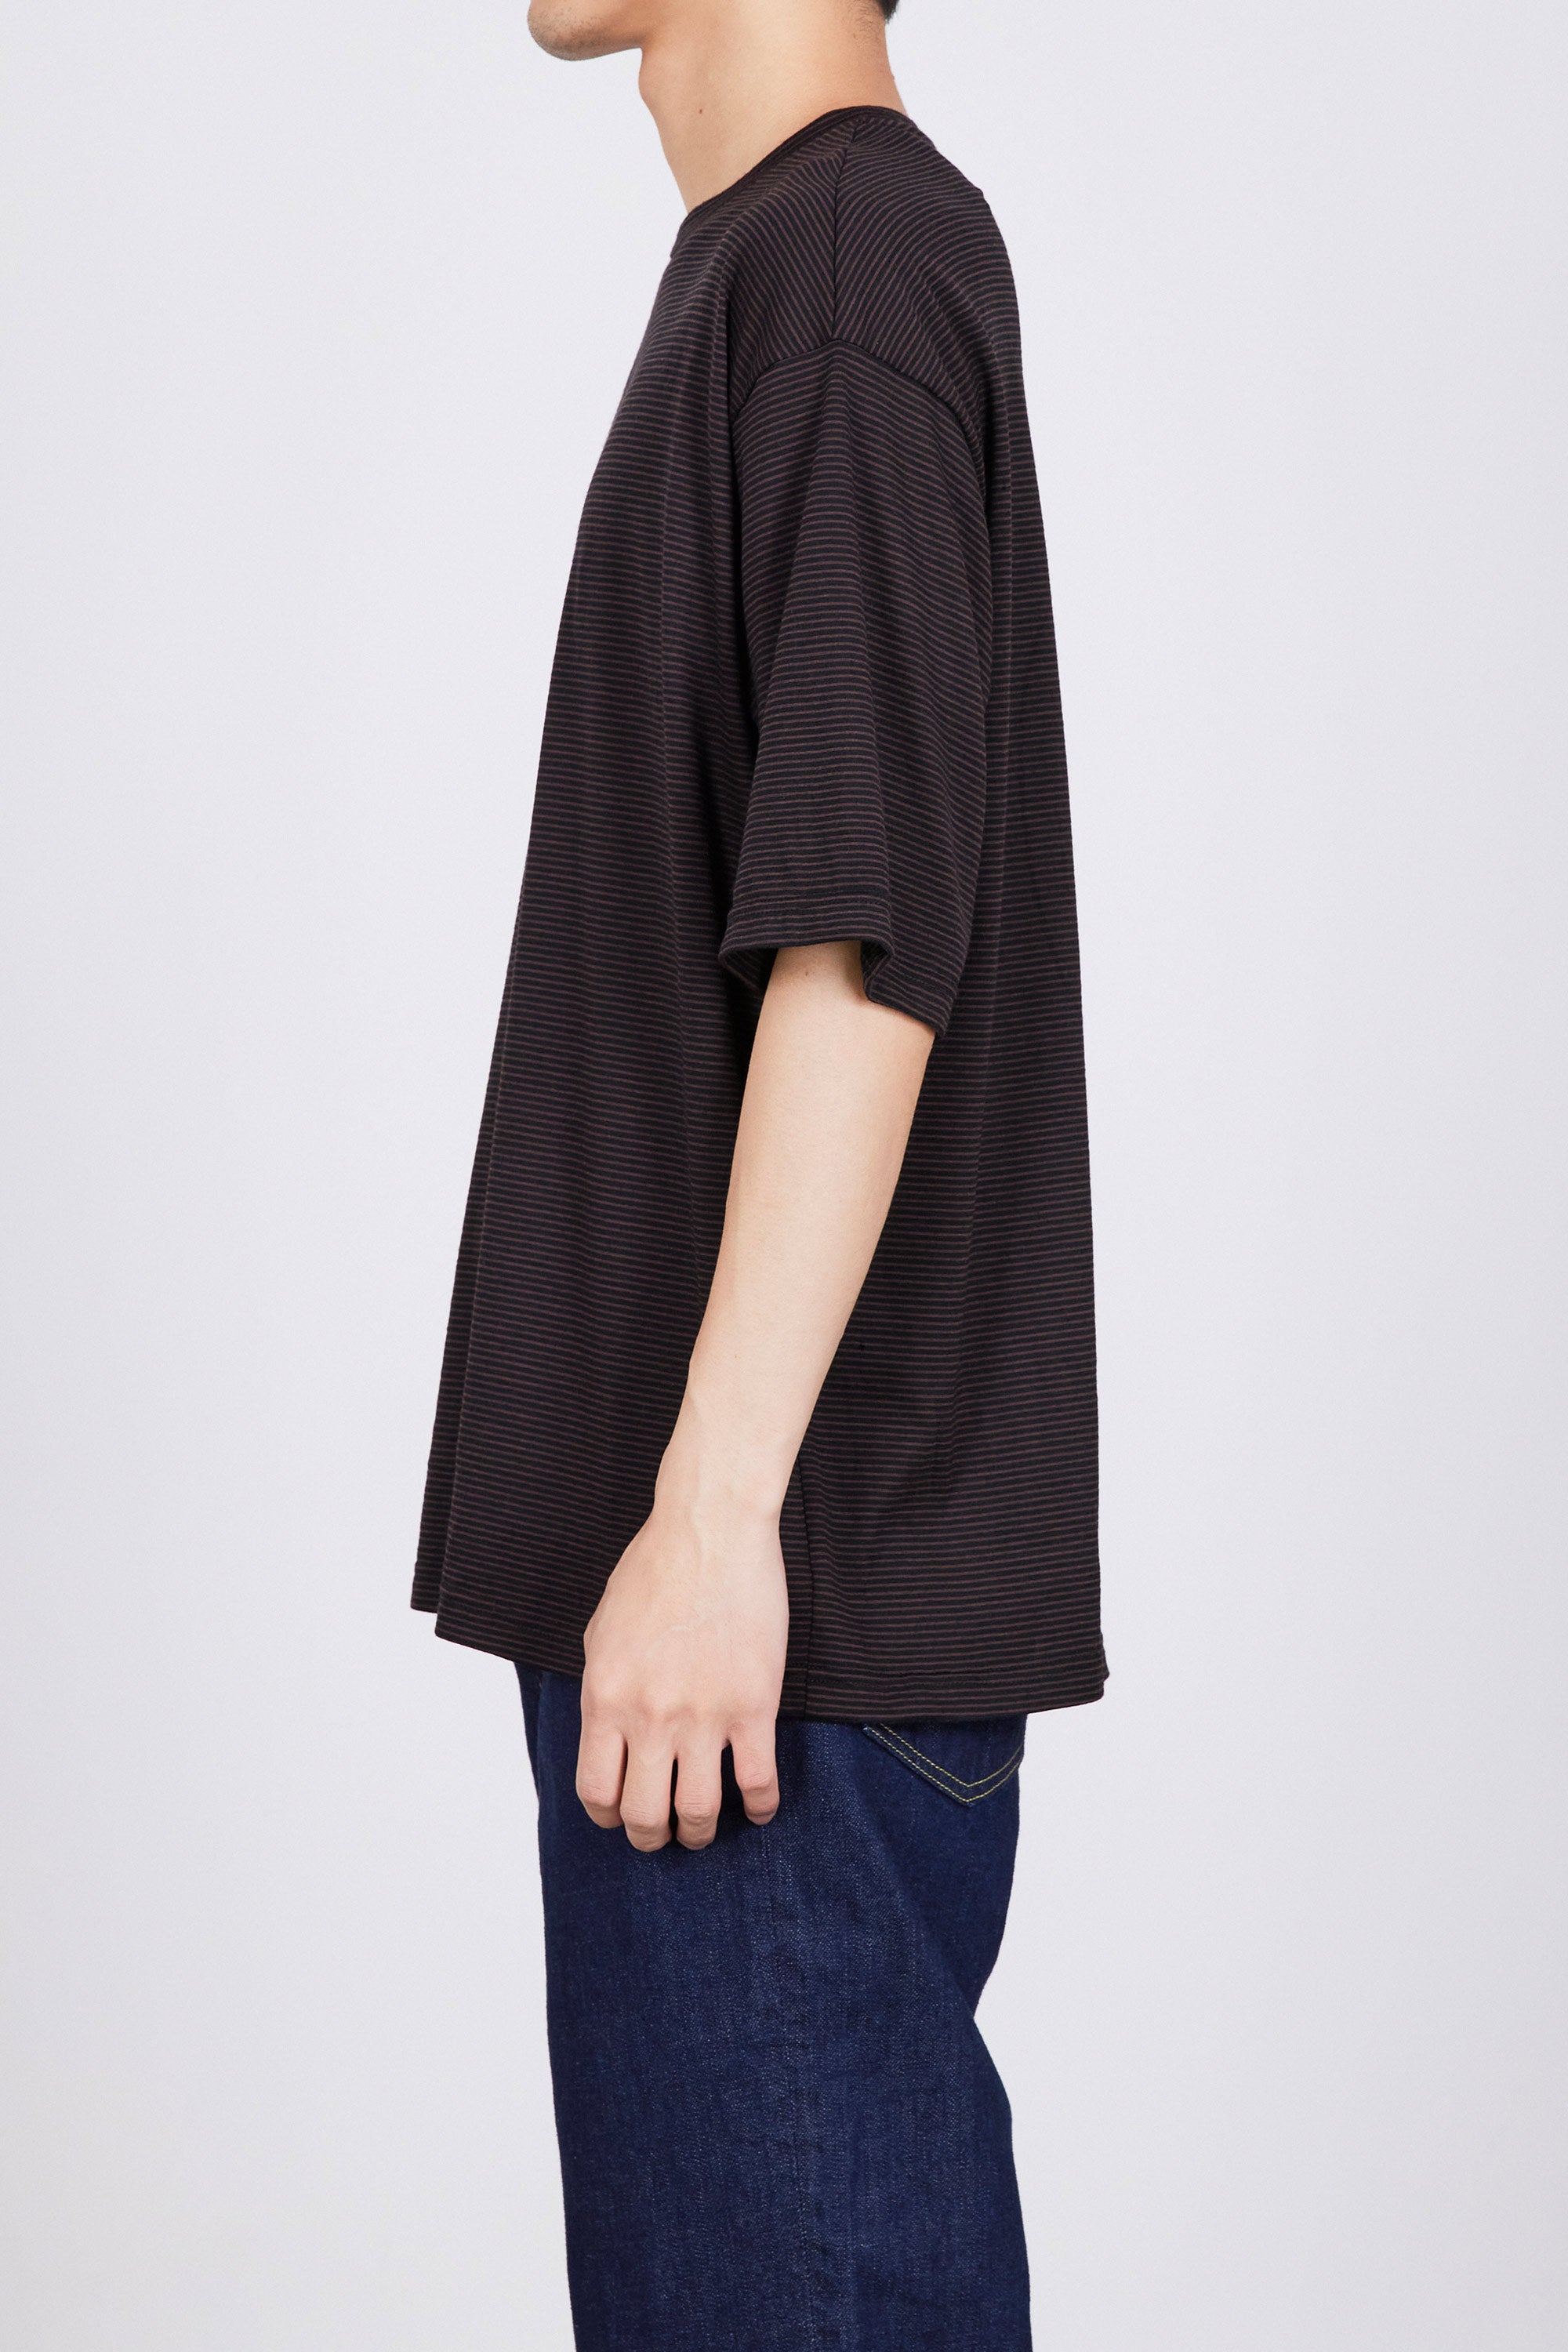 SUPER120s WOOL SINGLE JERSEY WASHABLE CREW NECK TEE, Black × Brown